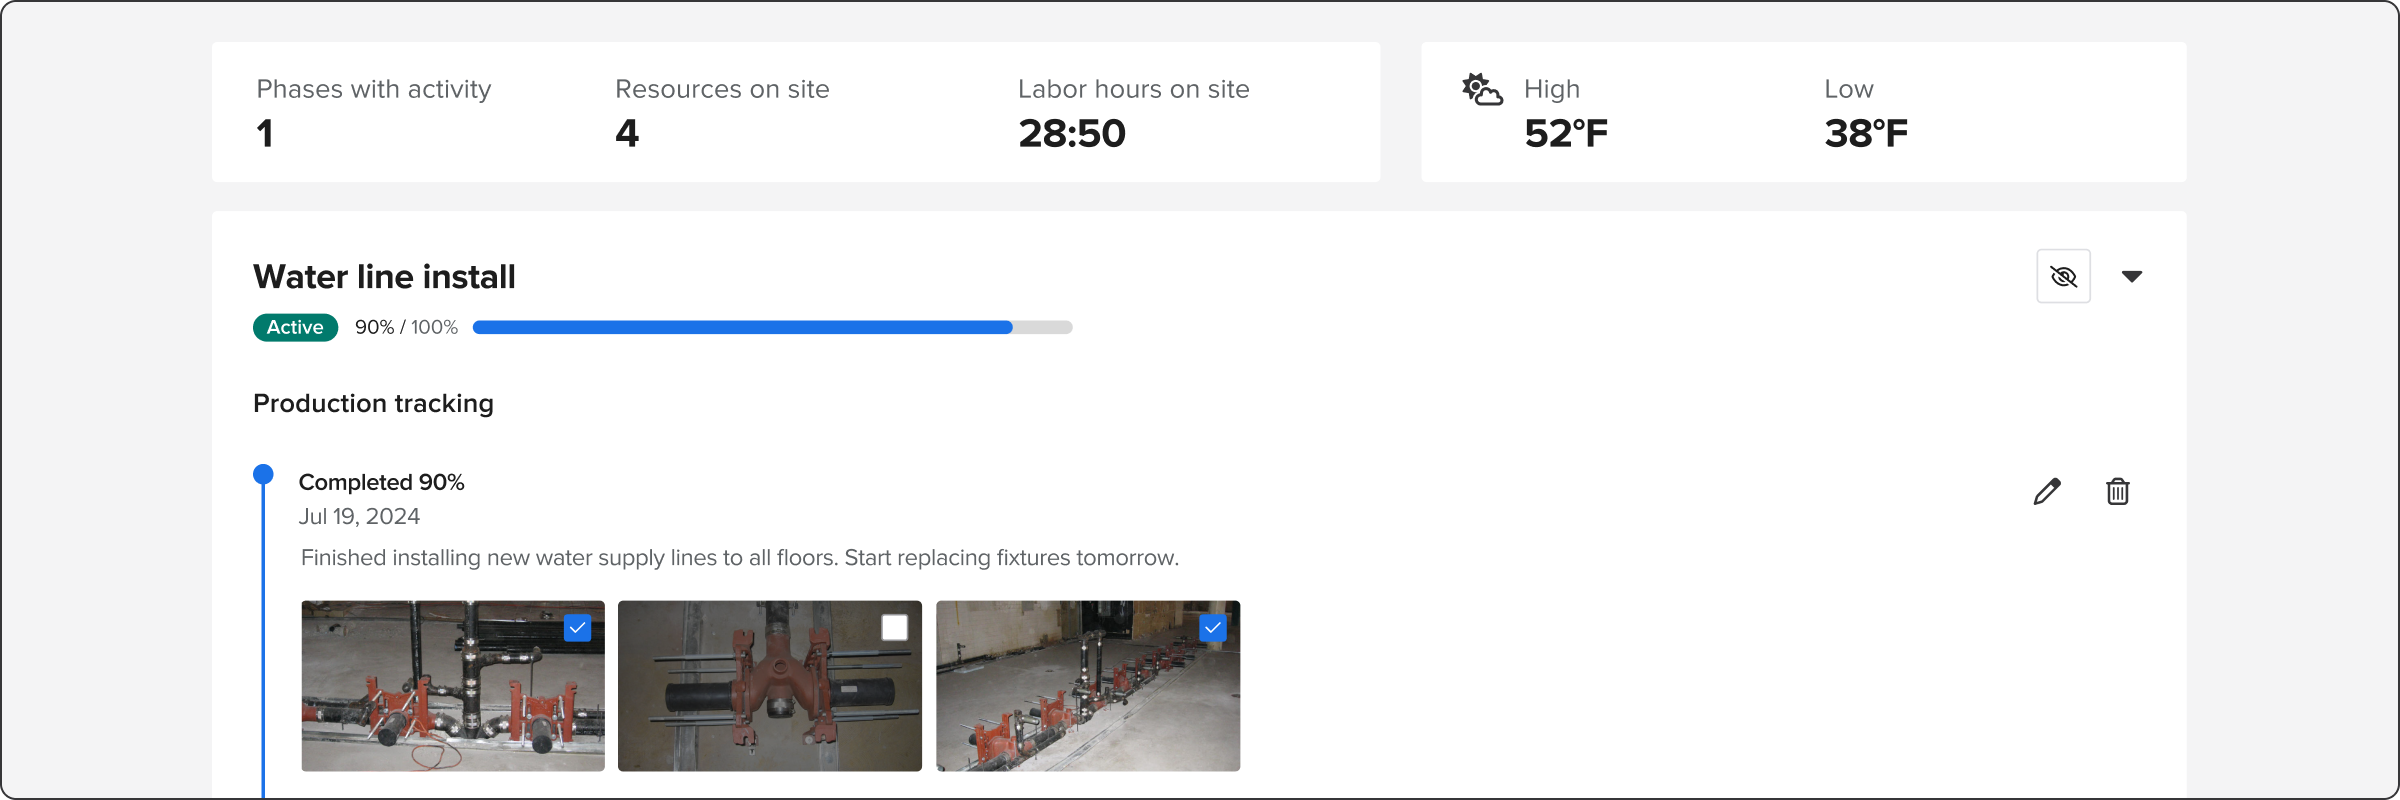 Daily logs view displaying summary, weather, and phase progress | Plumbing contractor | Knowify